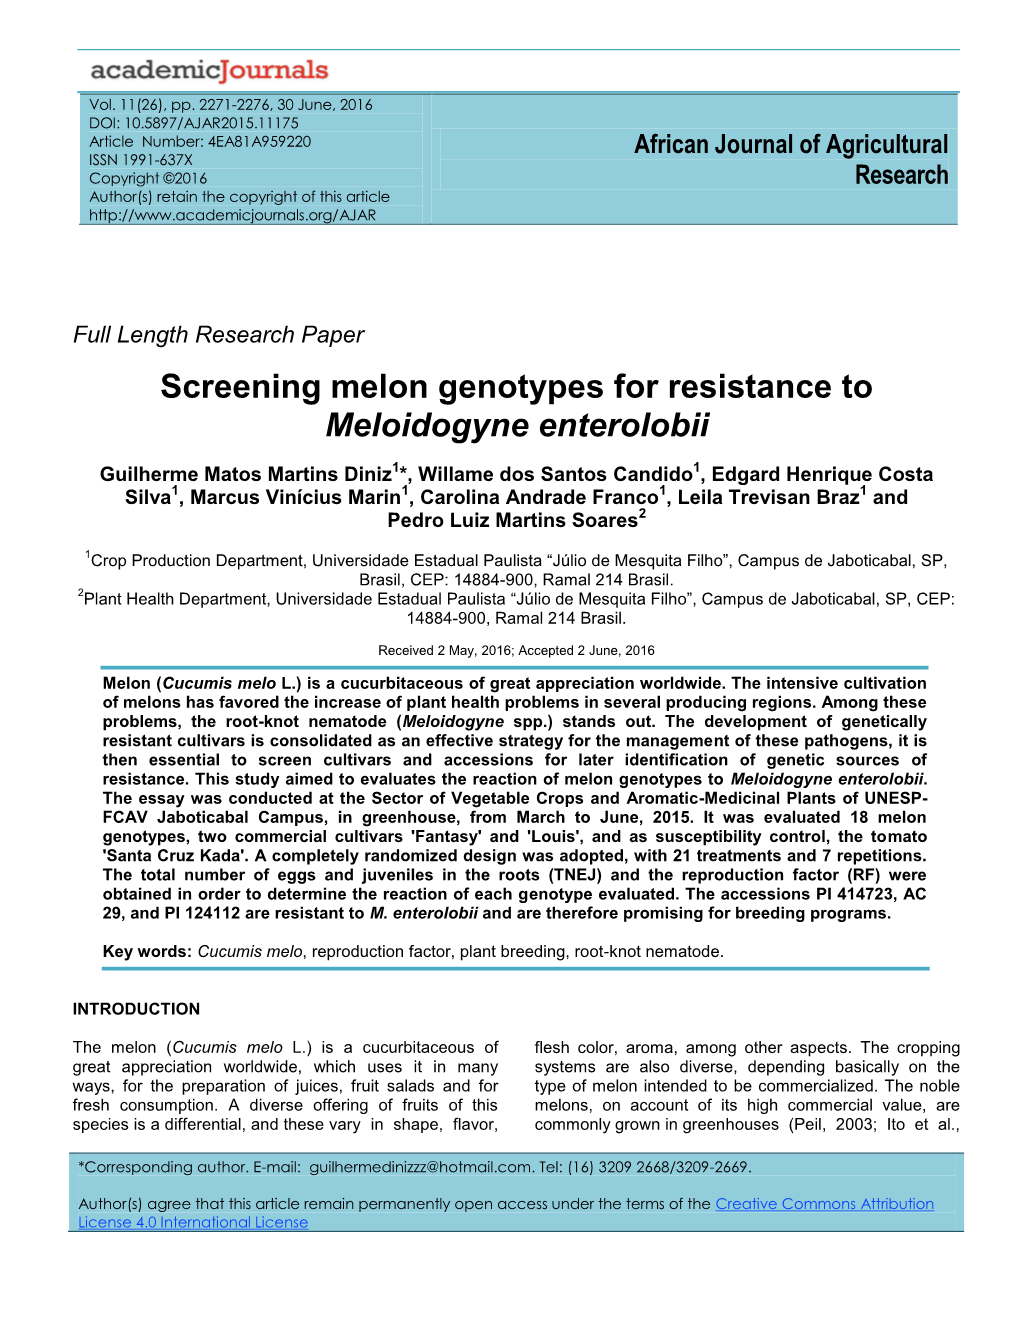 Screening Melon Genotypes for Resistance to Meloidogyne Enterolobii